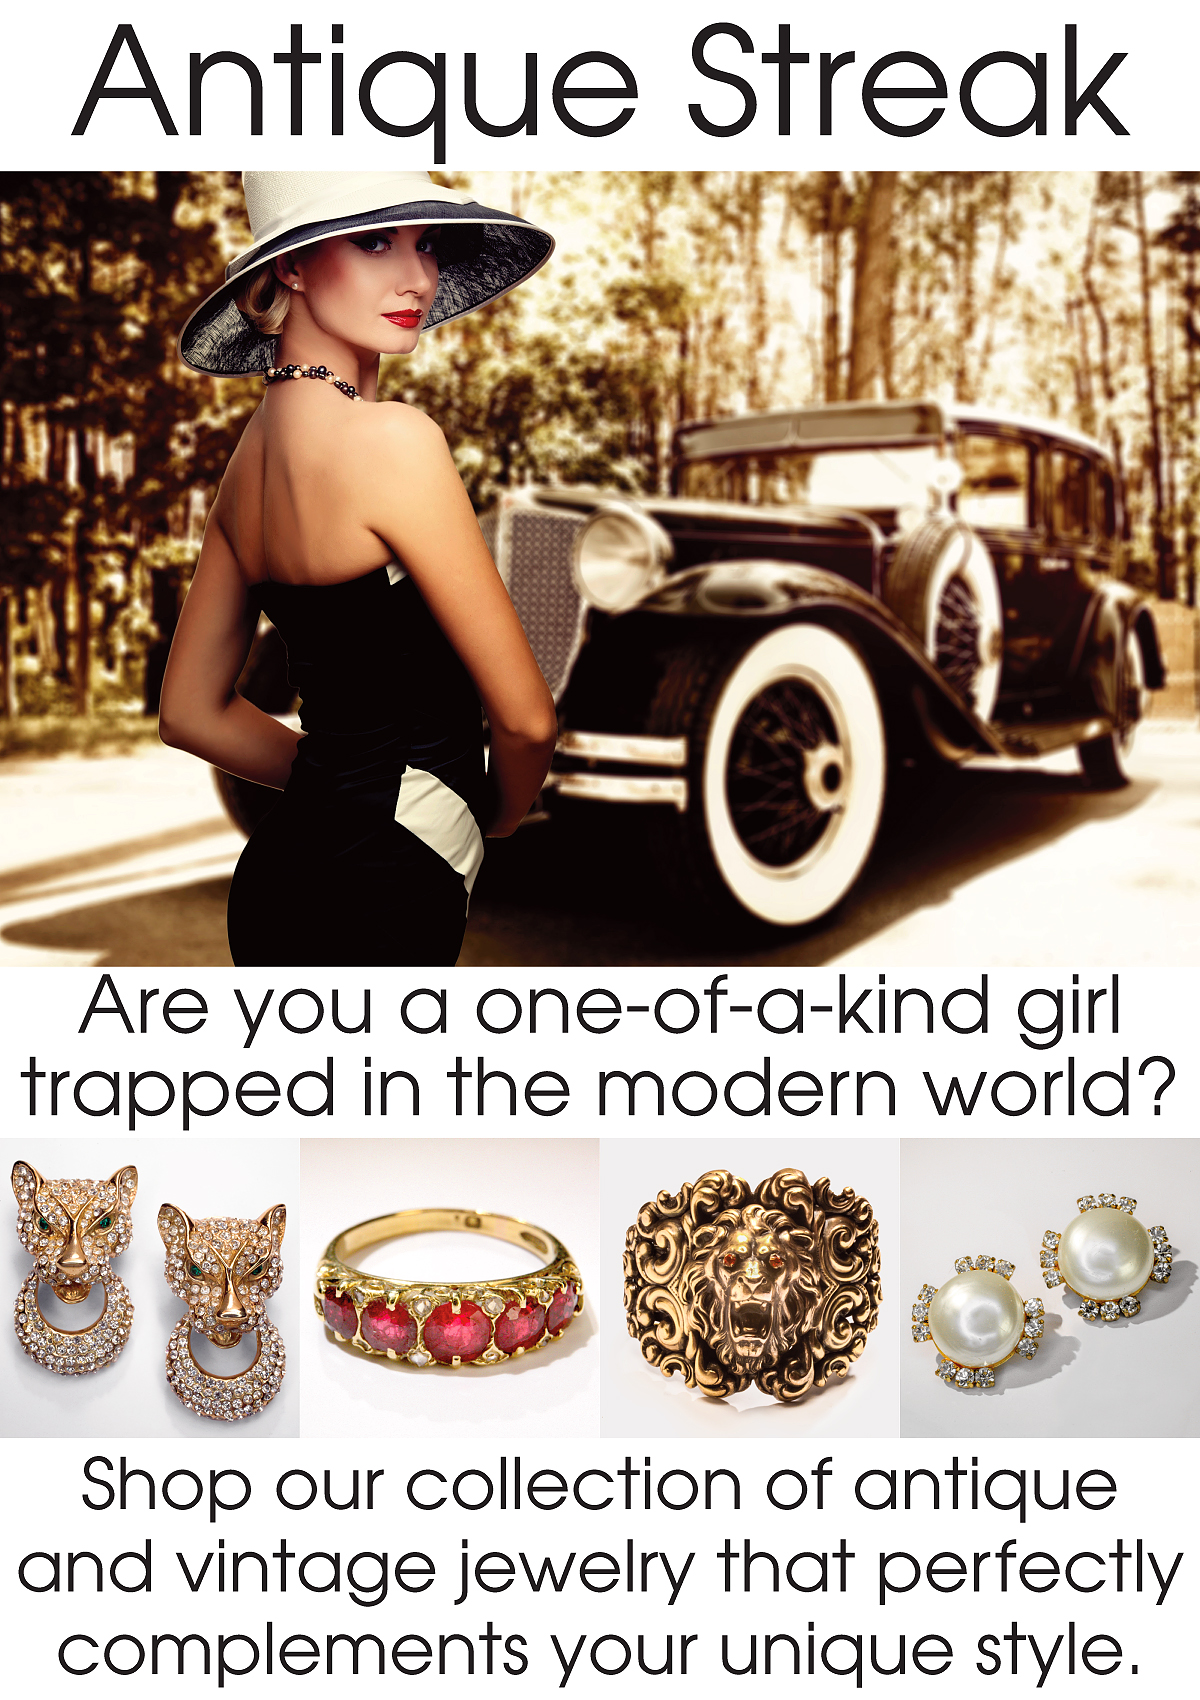 Shop our collection of antique and vintage jewelry that perfectly complements your unique style.